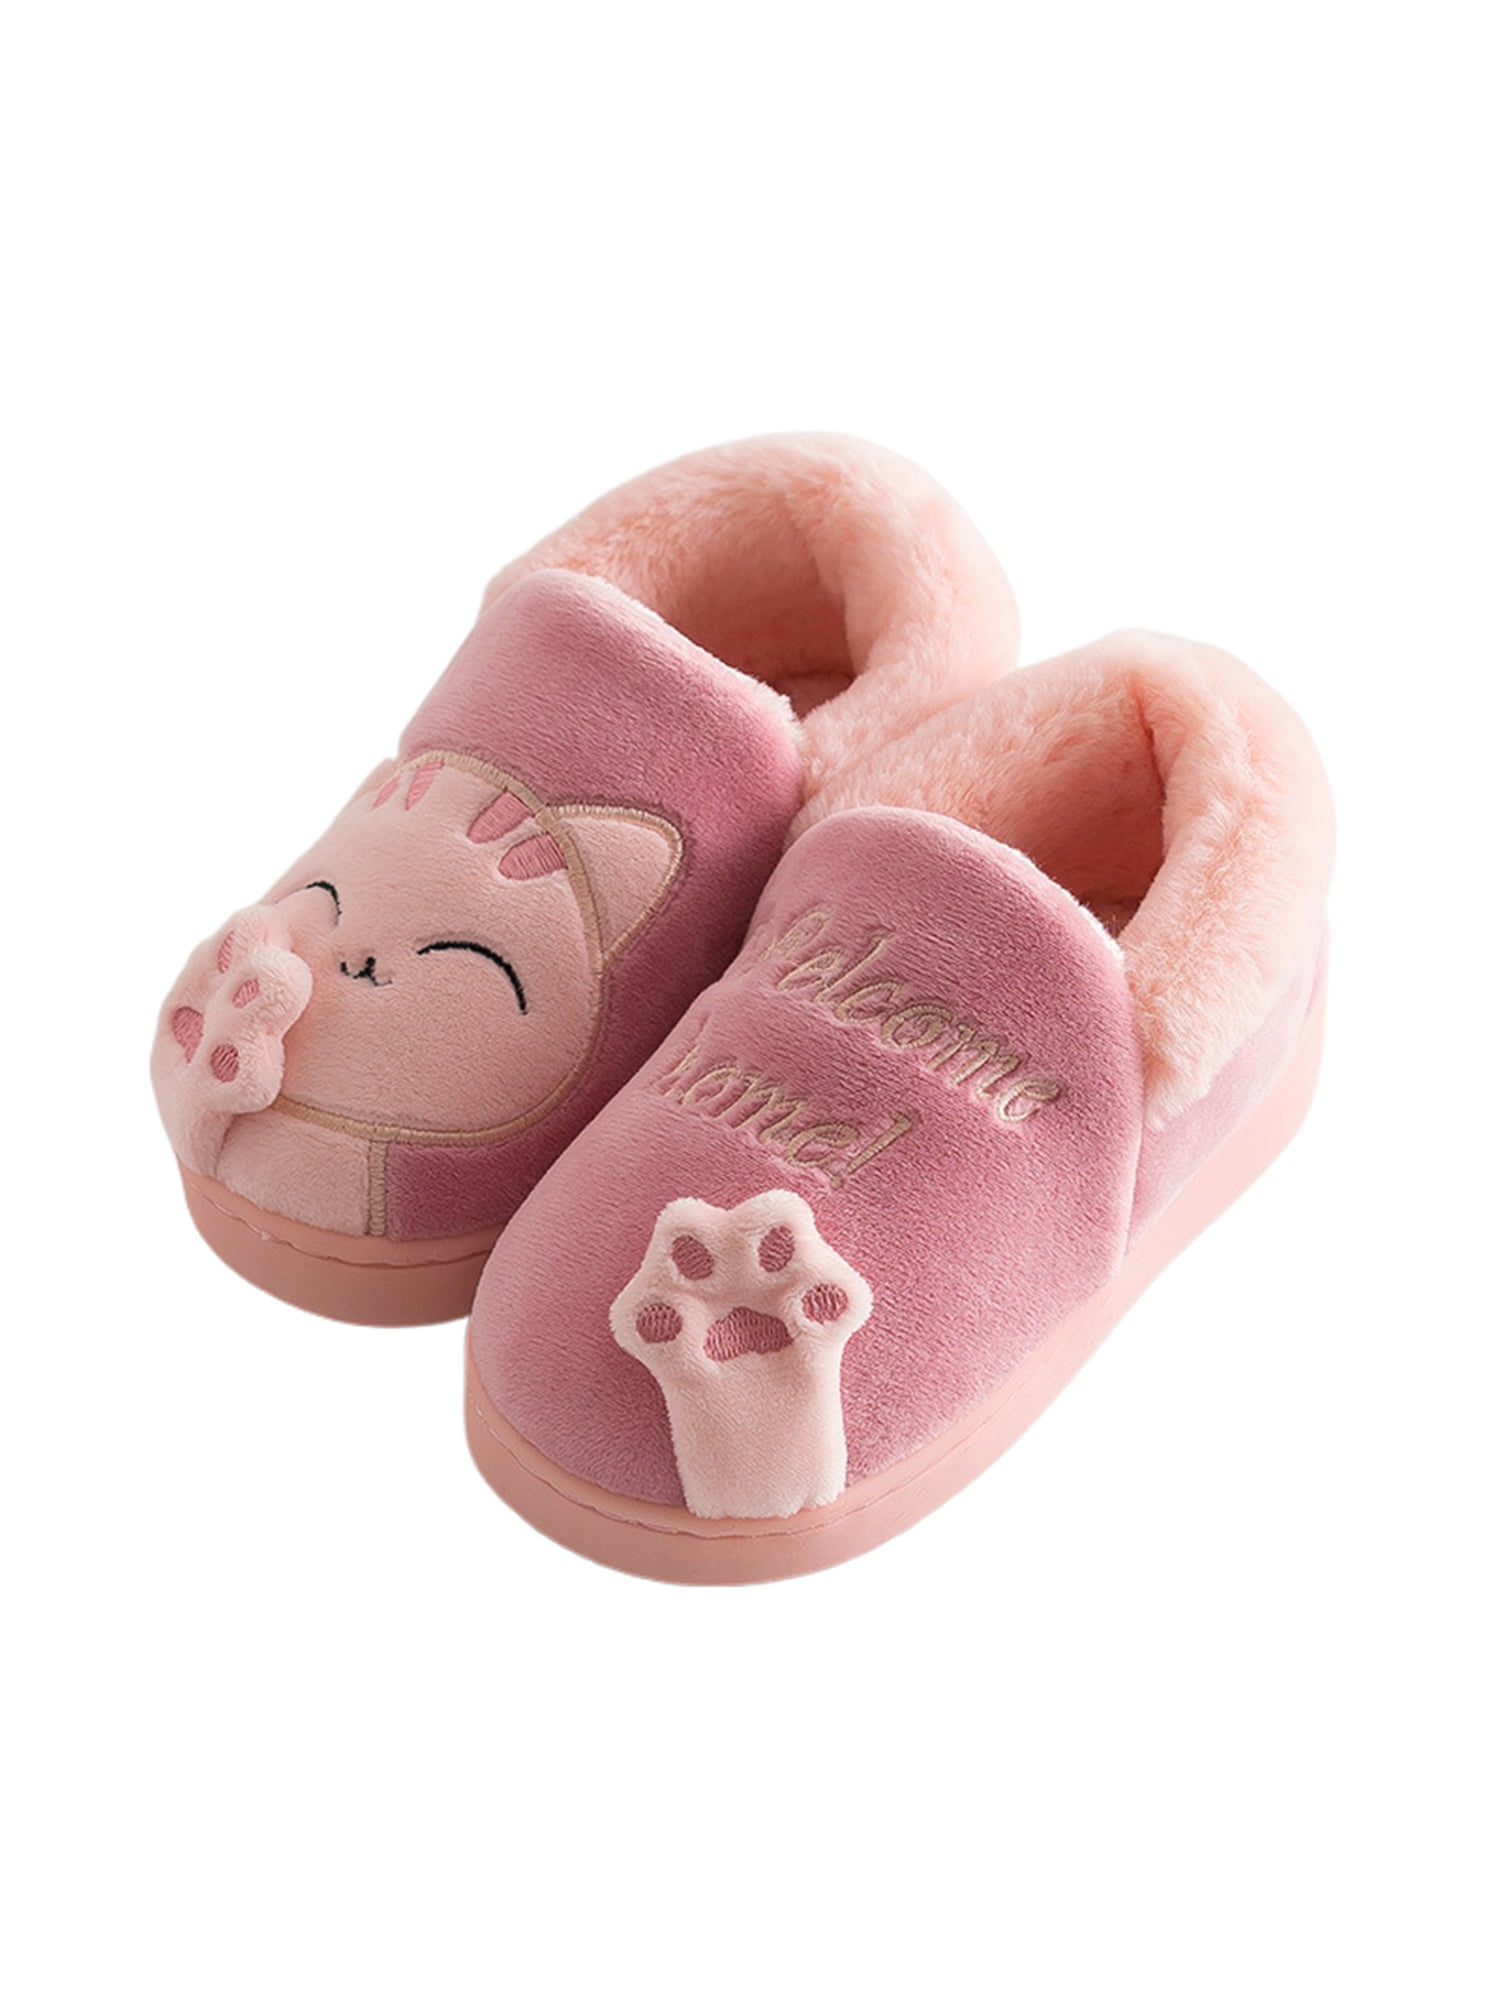 limited edition custom boot Shoes Girls Shoes Slippers Soft leather slippers children's slipper bird 